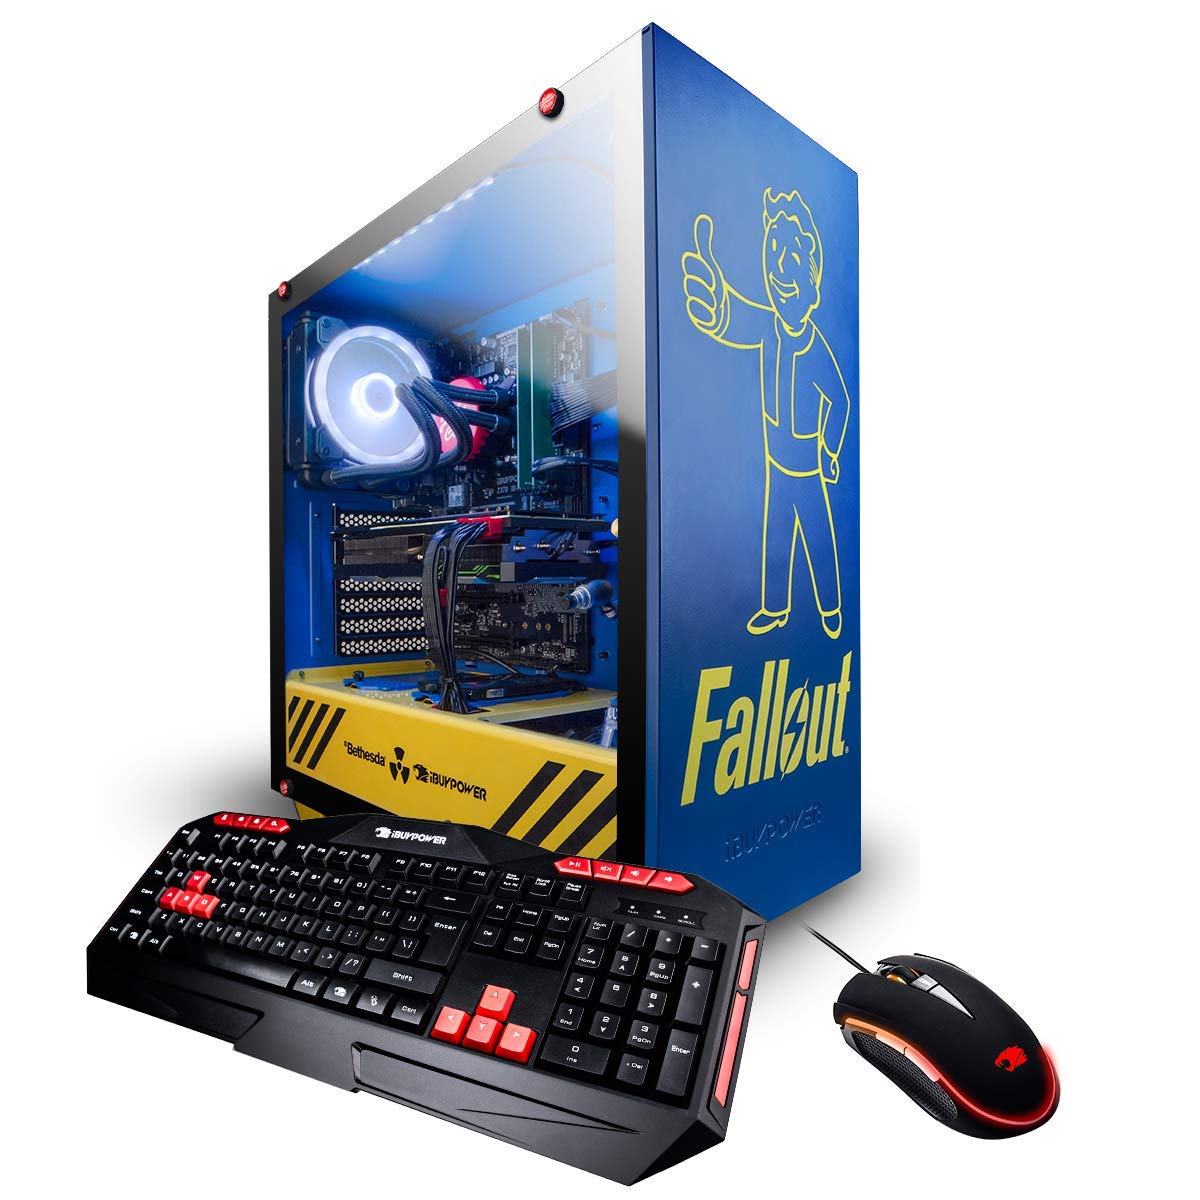 Fallout Gaming PC